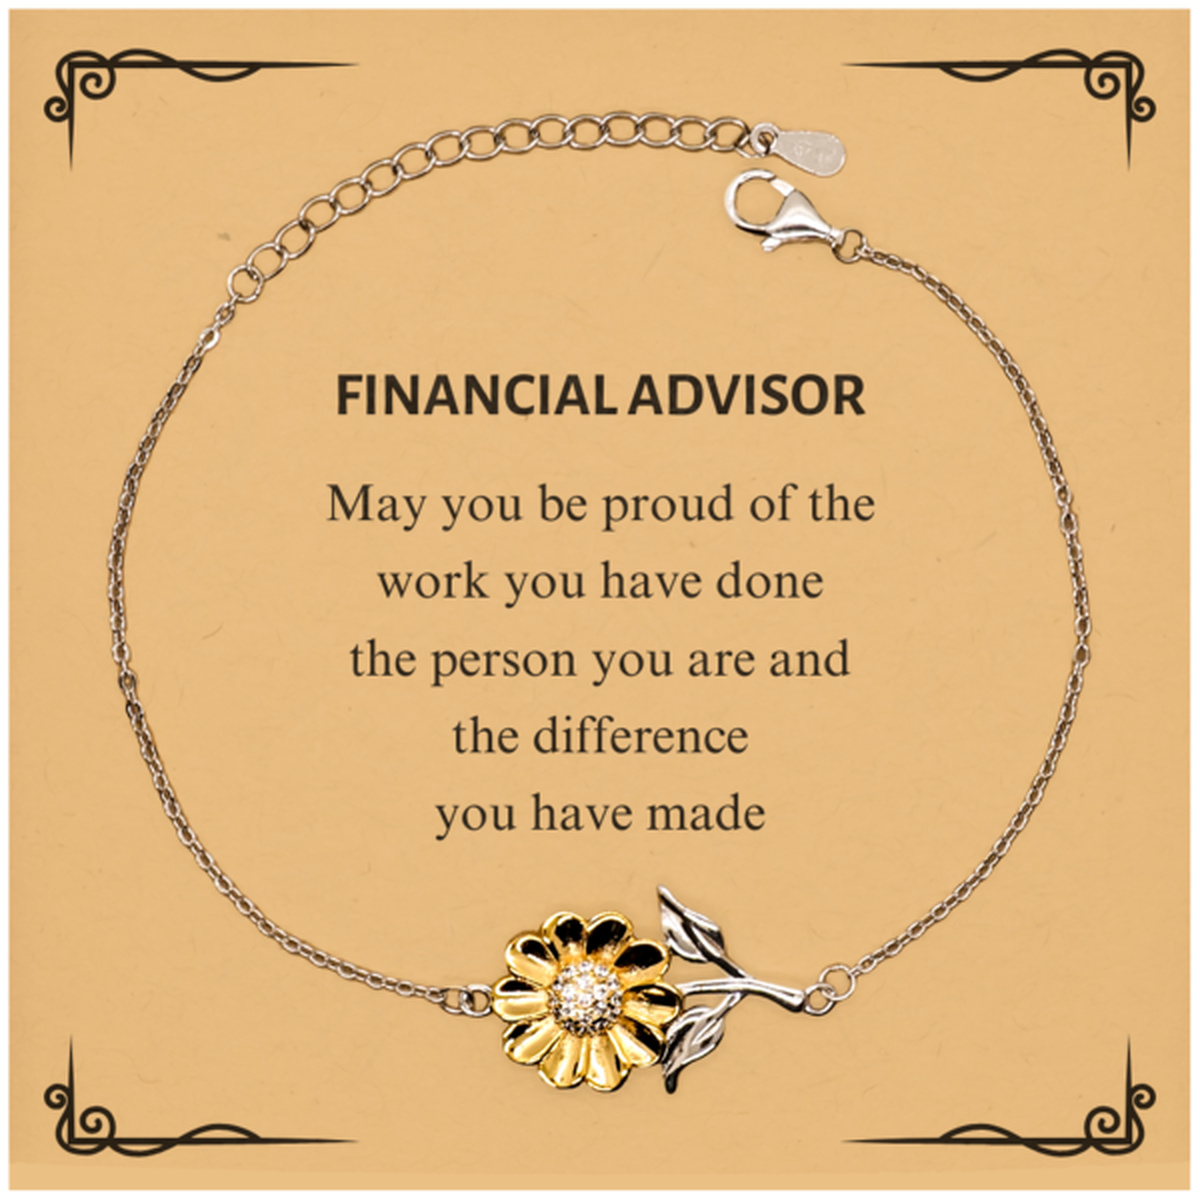 Financial Advisor May you be proud of the work you have done, Retirement Financial Advisor Sunflower Bracelet for Colleague Appreciation Gifts Amazing for Financial Advisor